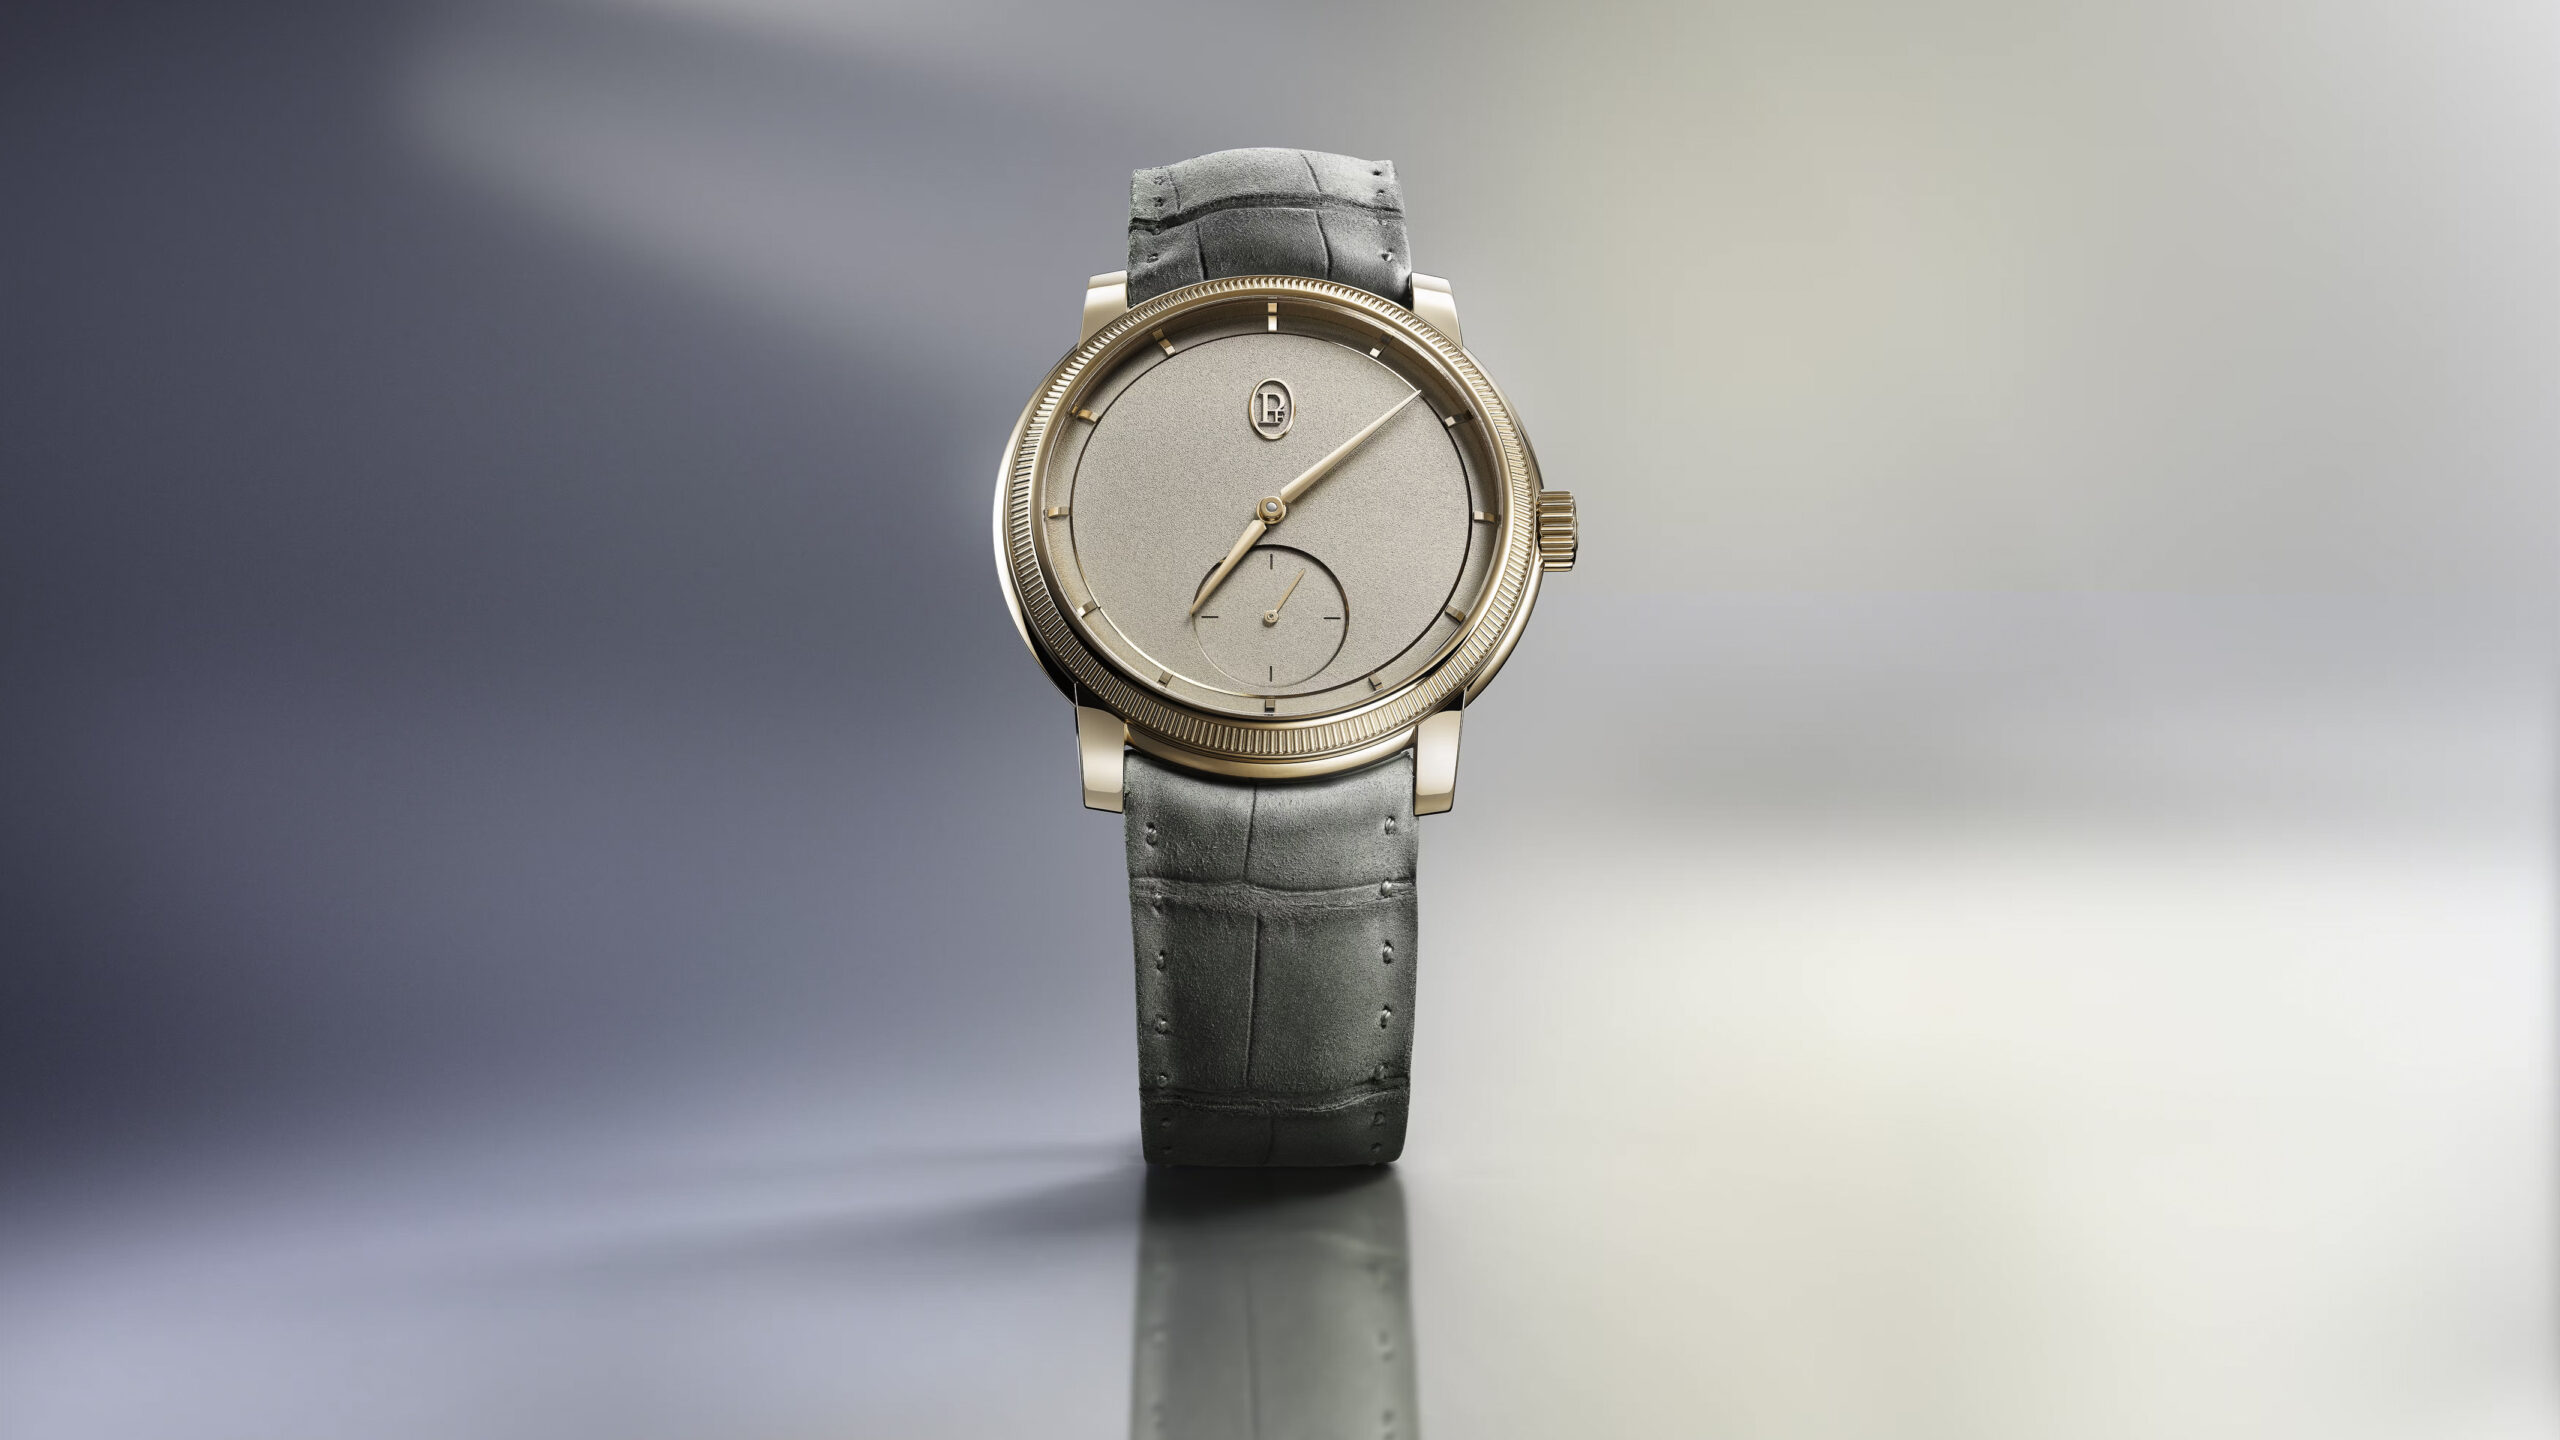 Parmigiani Fleurier Tonda is back – and in style!